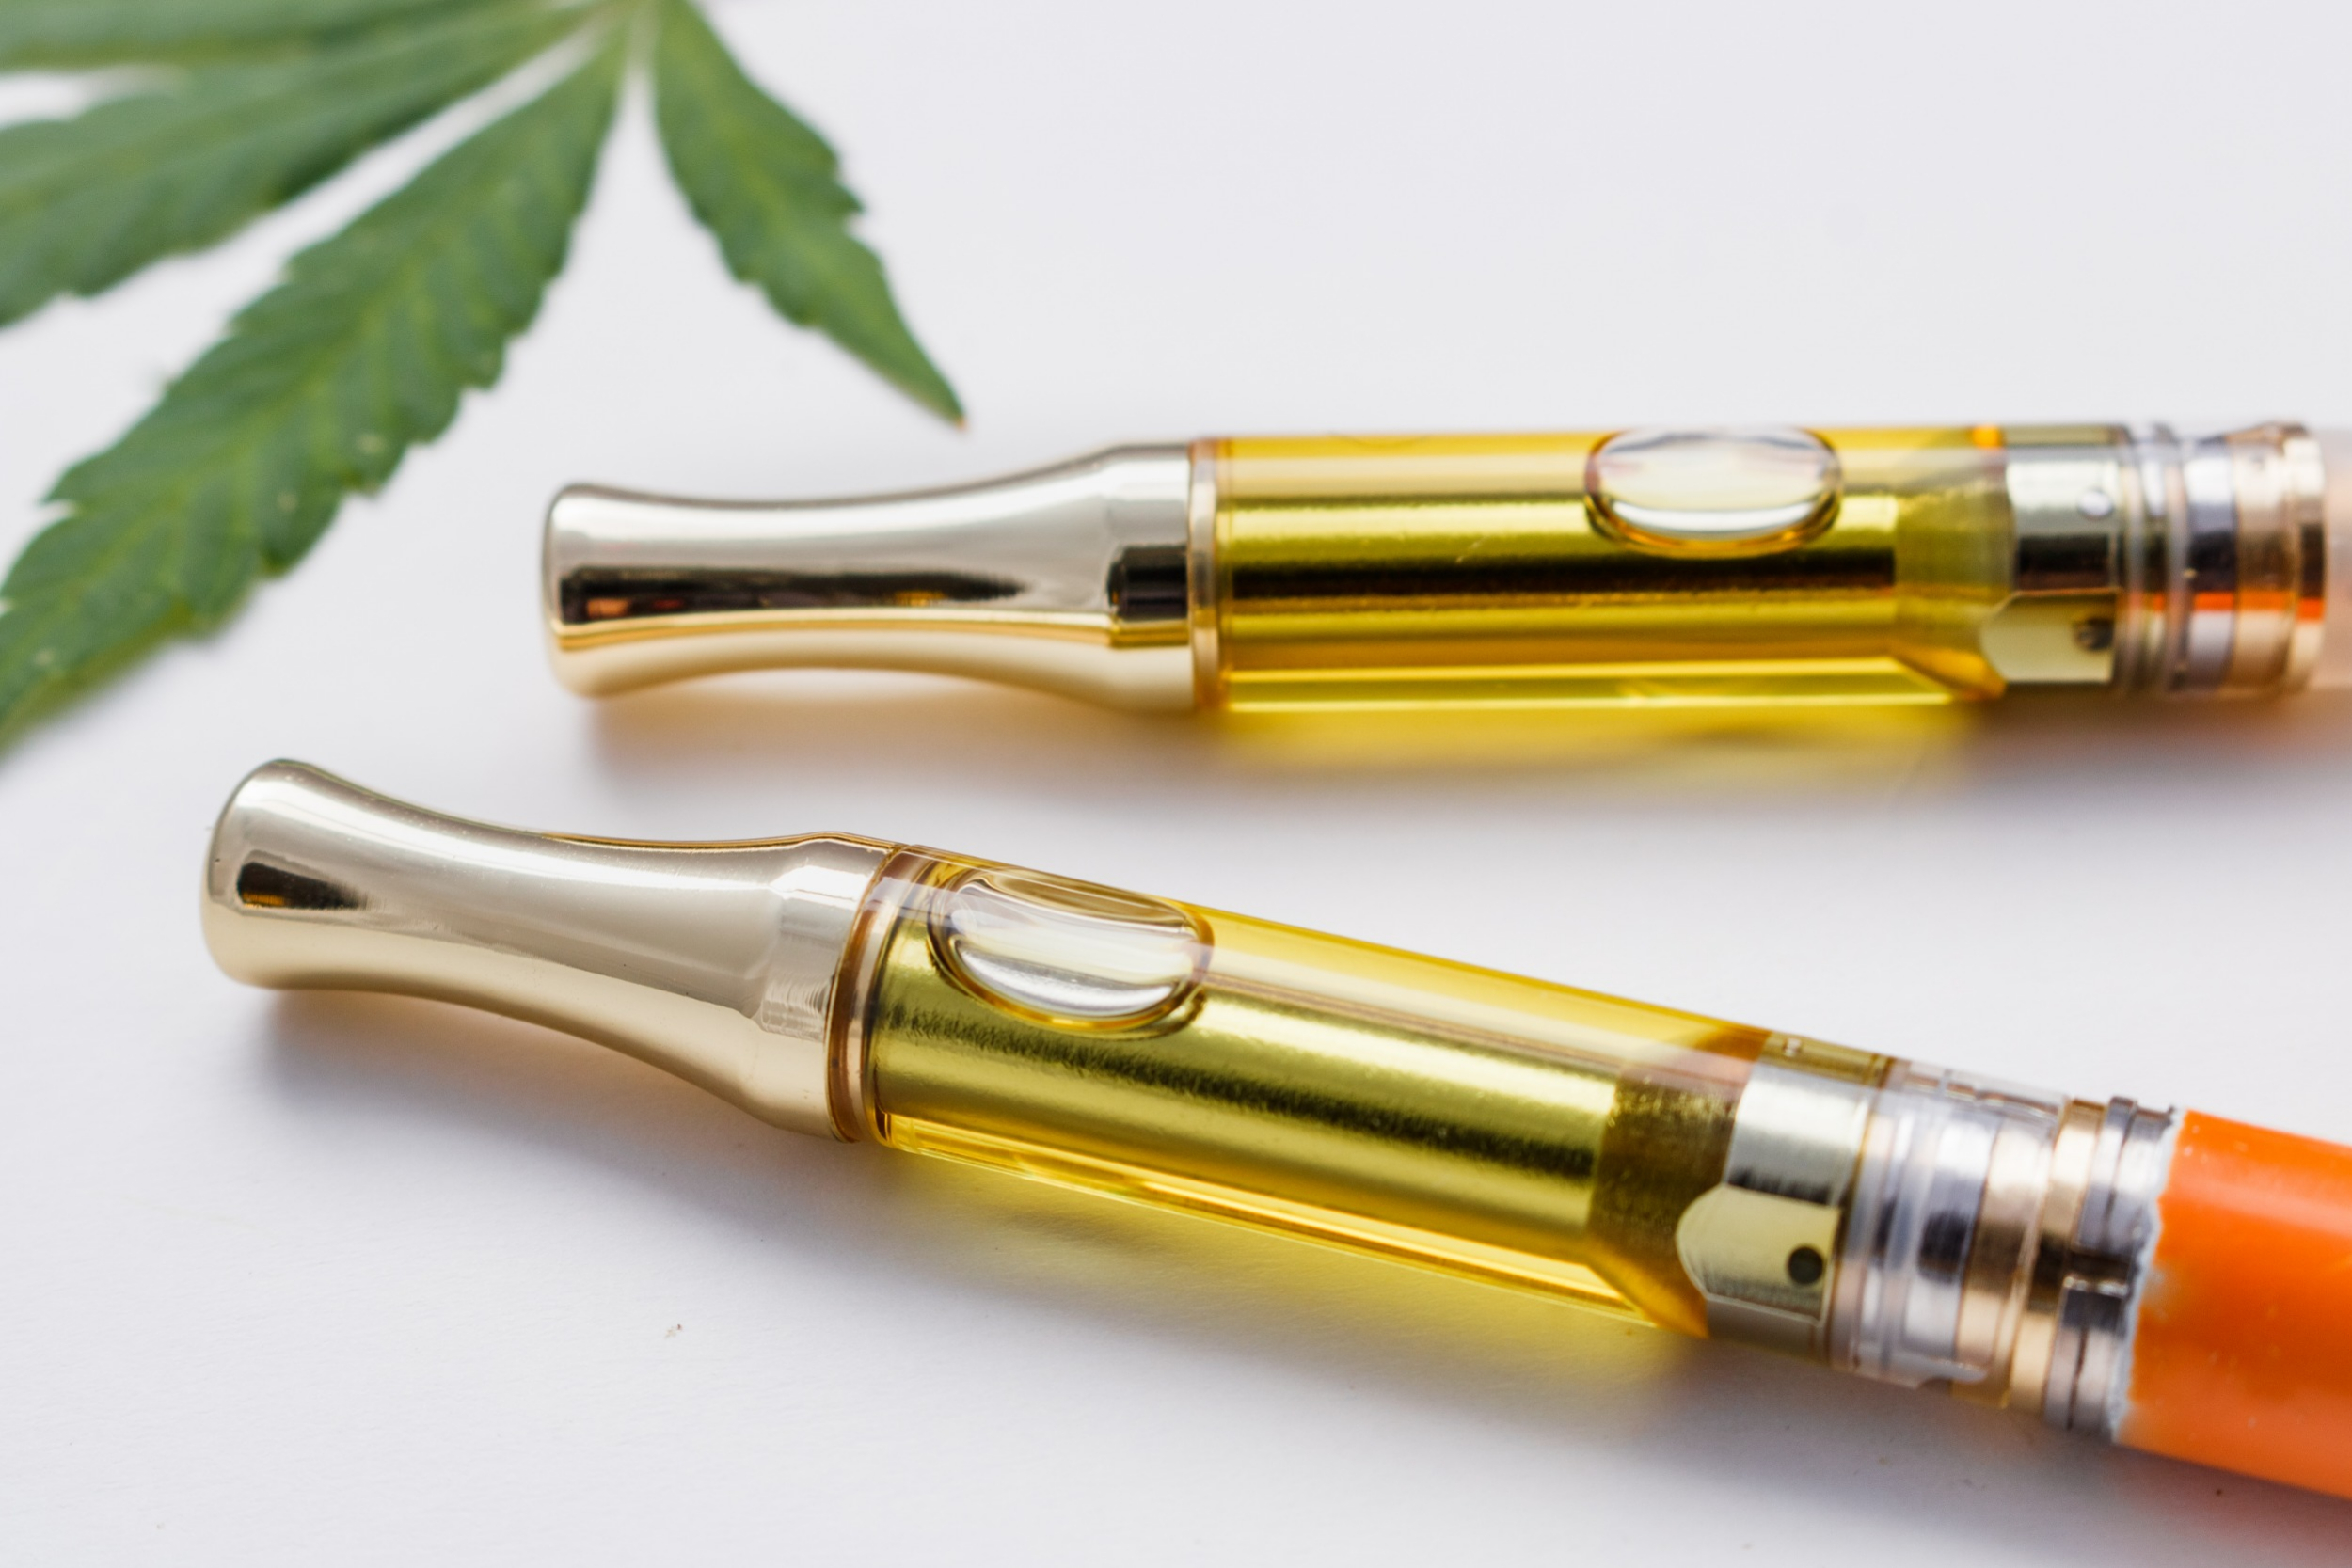 How to Use CBD Oil in a Vape Pen